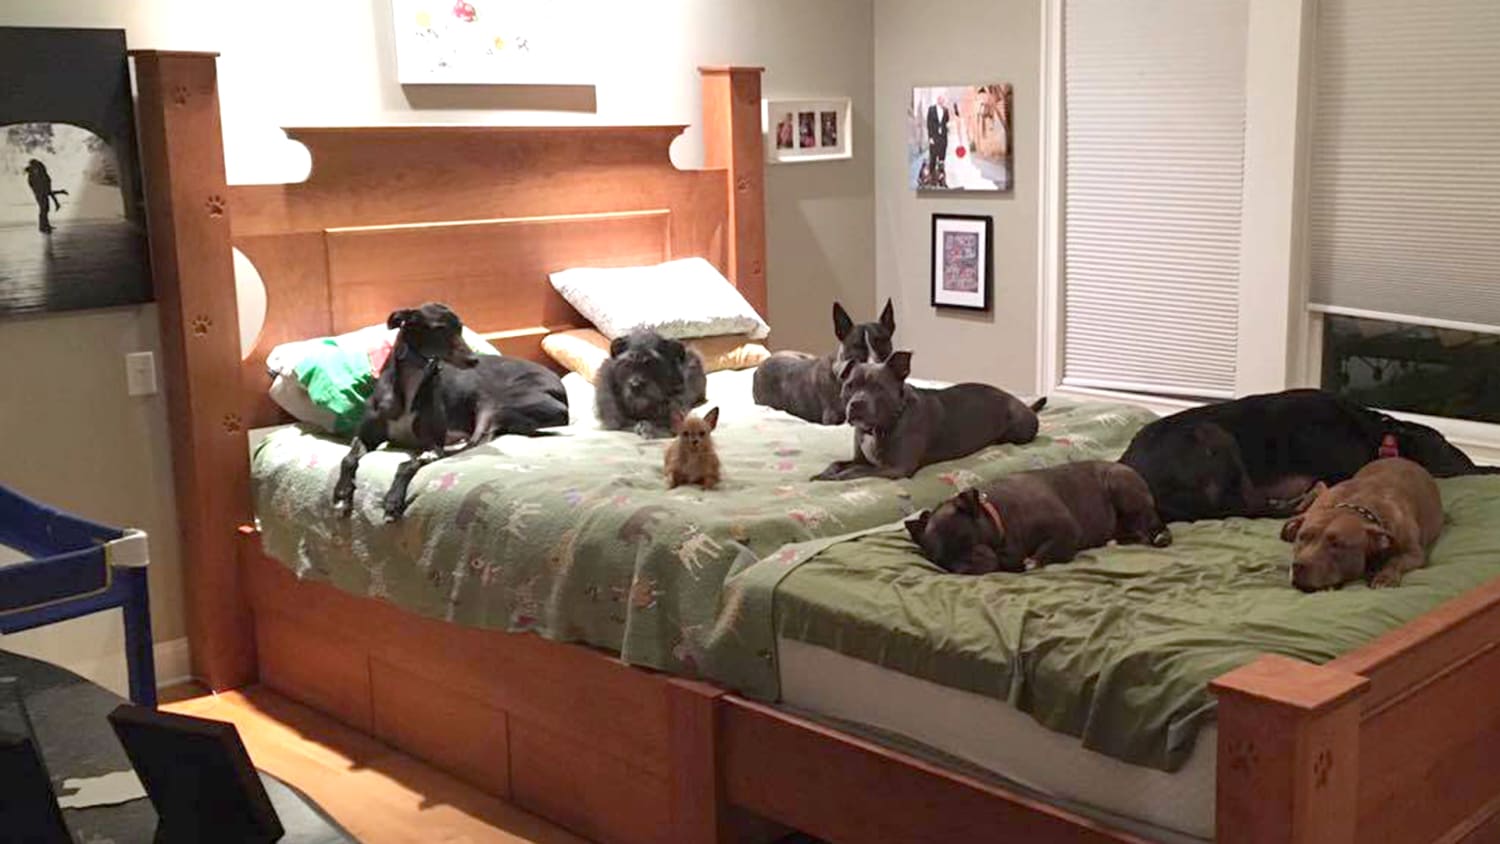 Giant Bed To Sleep Comfortably With 8 Dogs, King Size Bed With Dog Insert